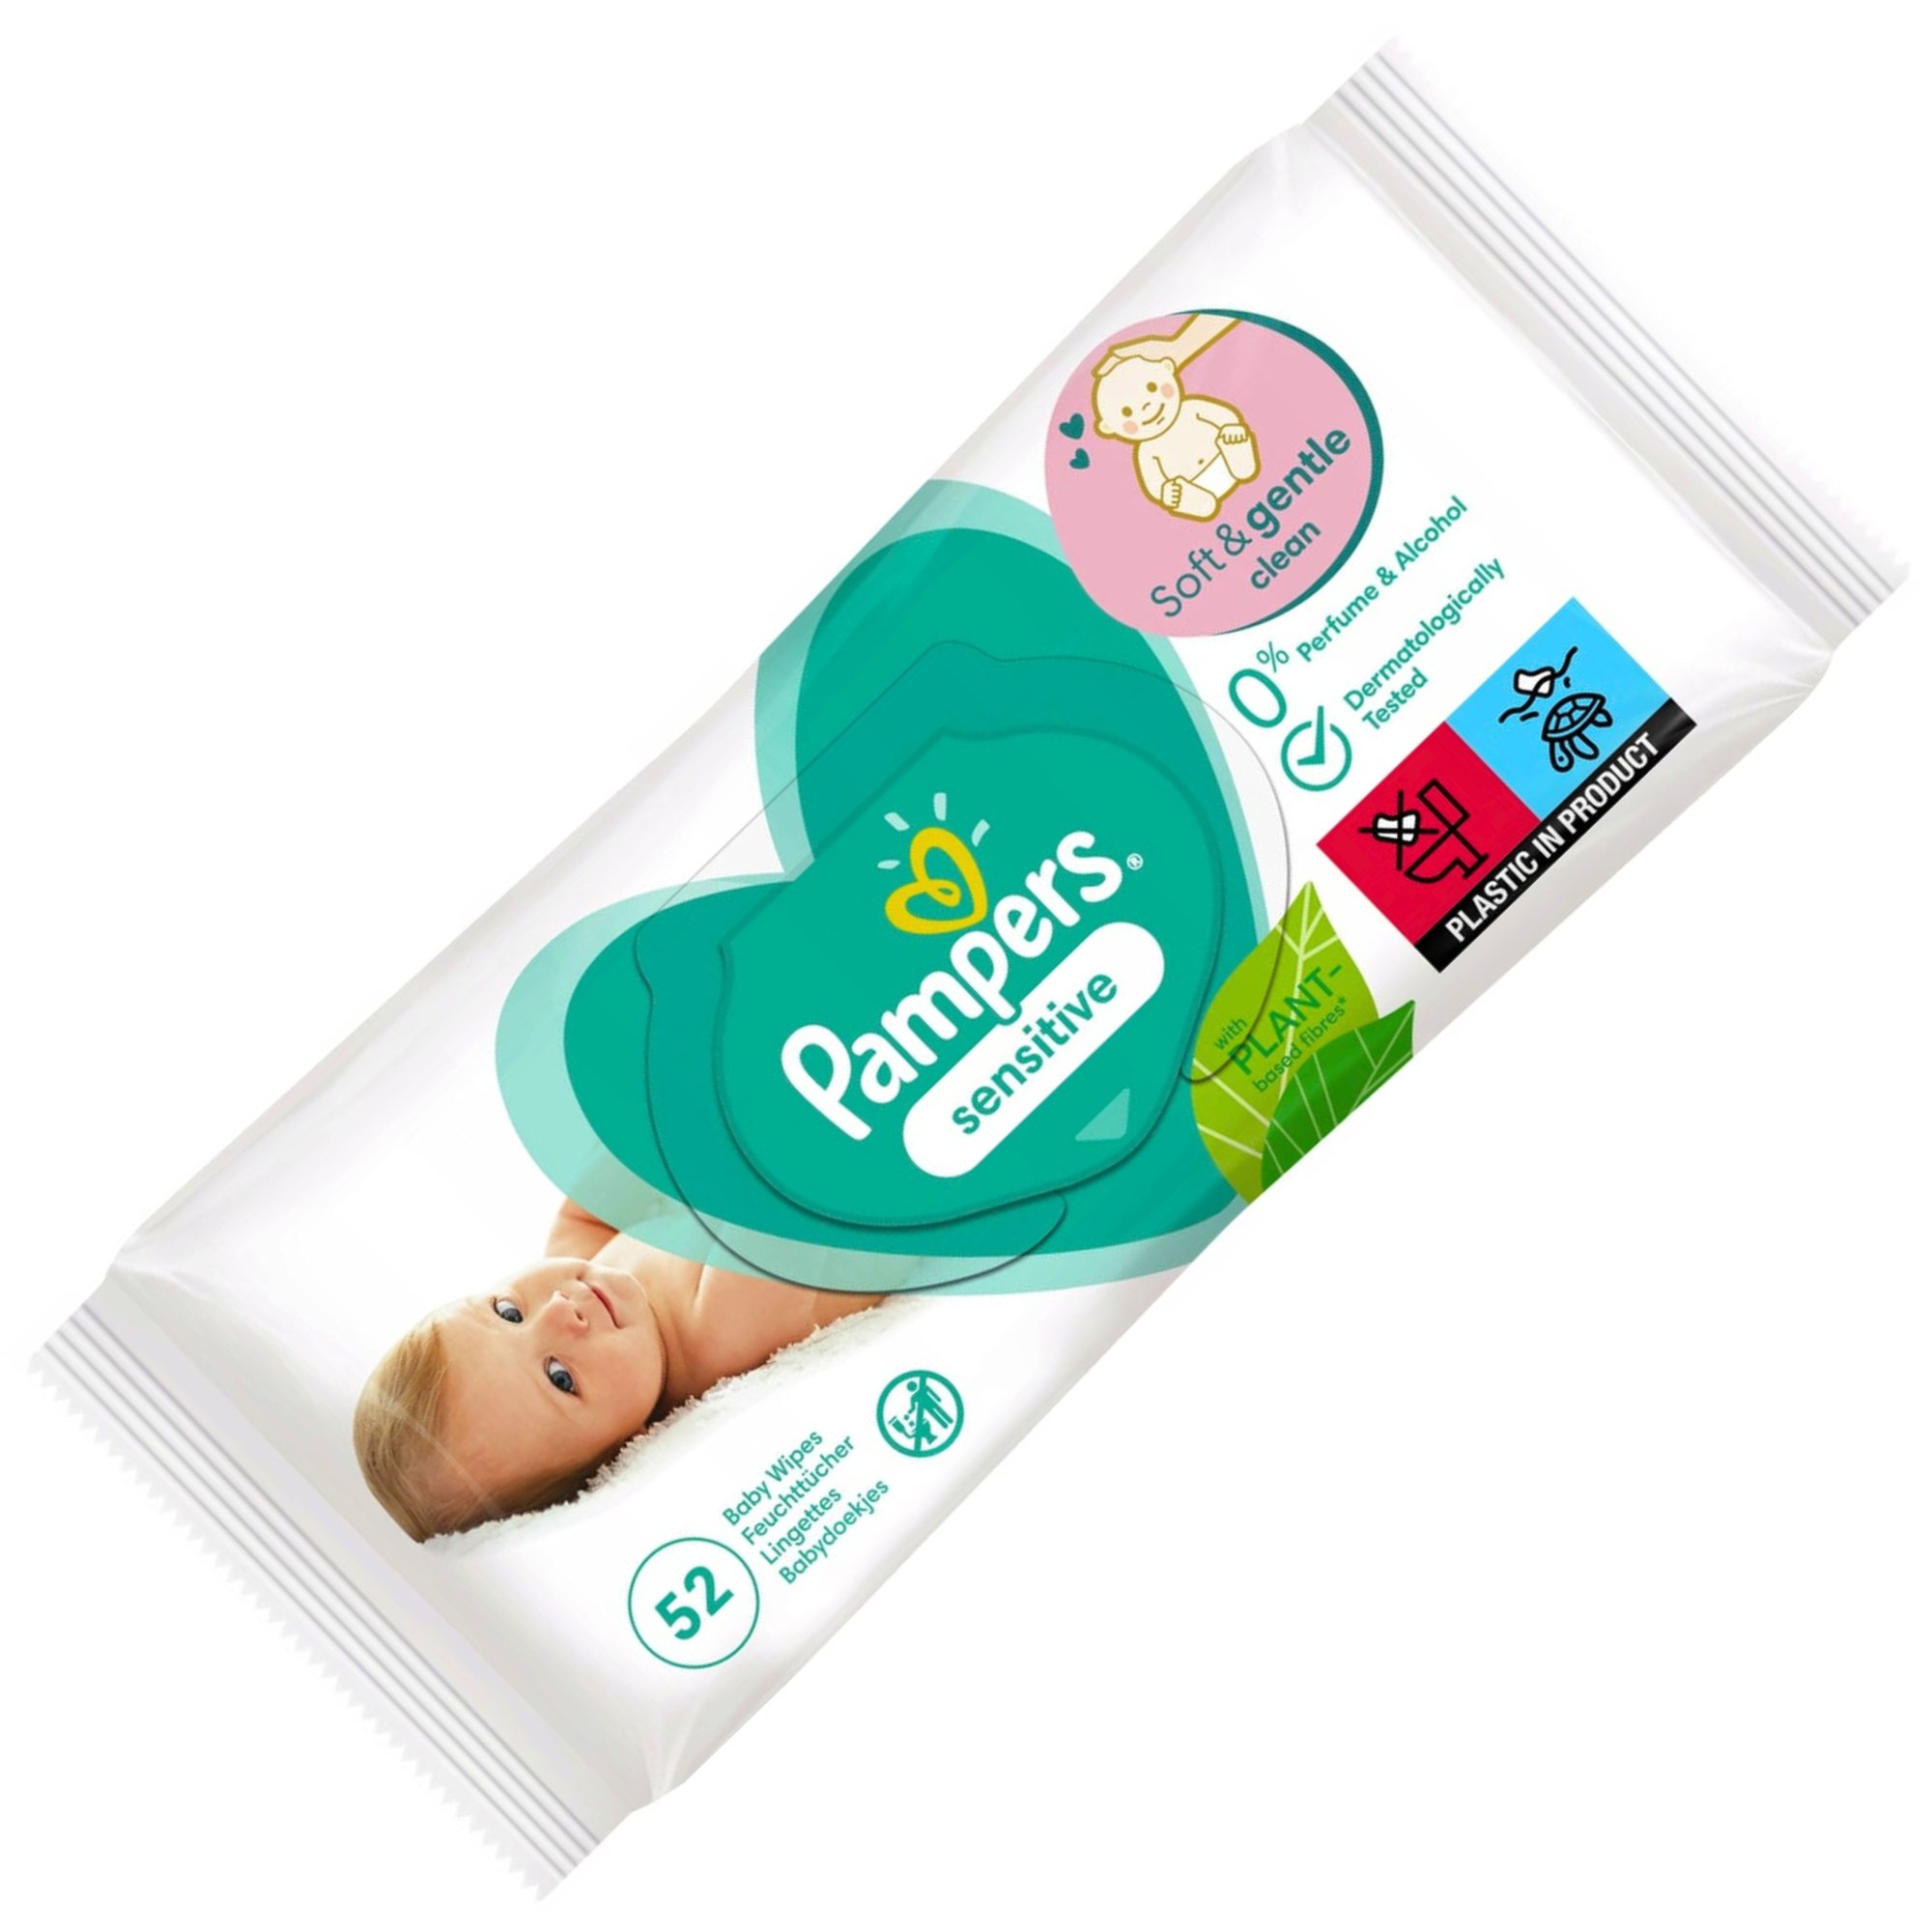 best pampers brand europe 2016